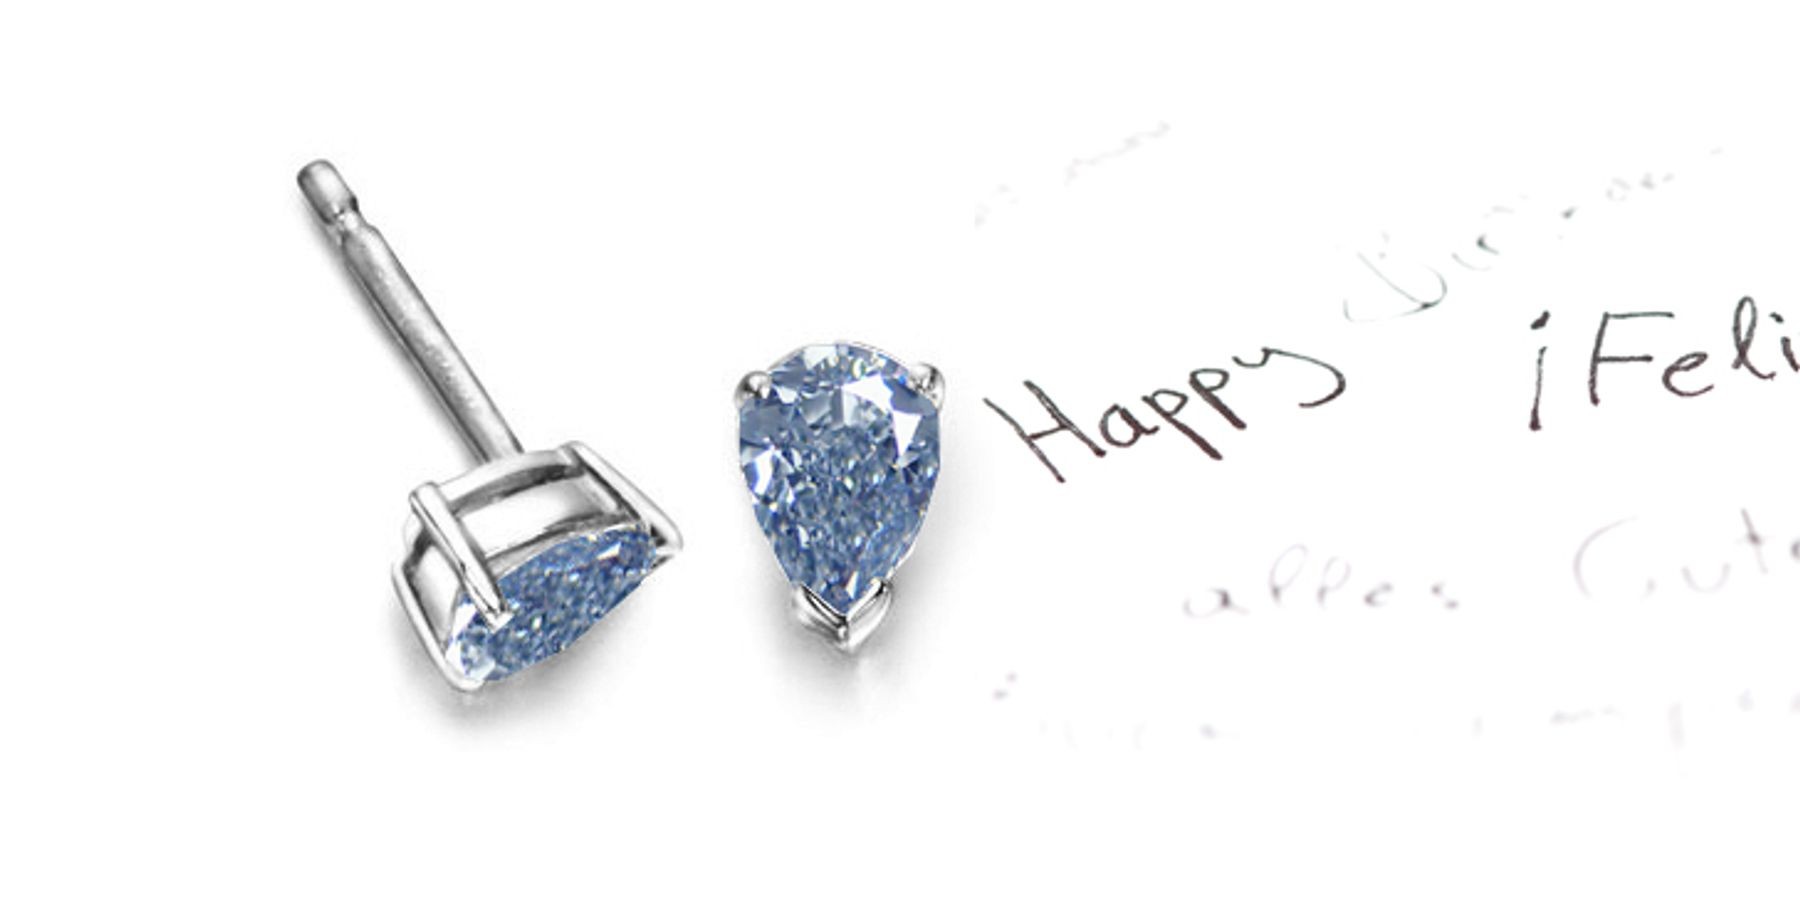 Rare Colored Diamonds Designer Collection - Blue Colored Diamonds & White Diamonds Fancy Blue Diamond Lock Wires Earrings